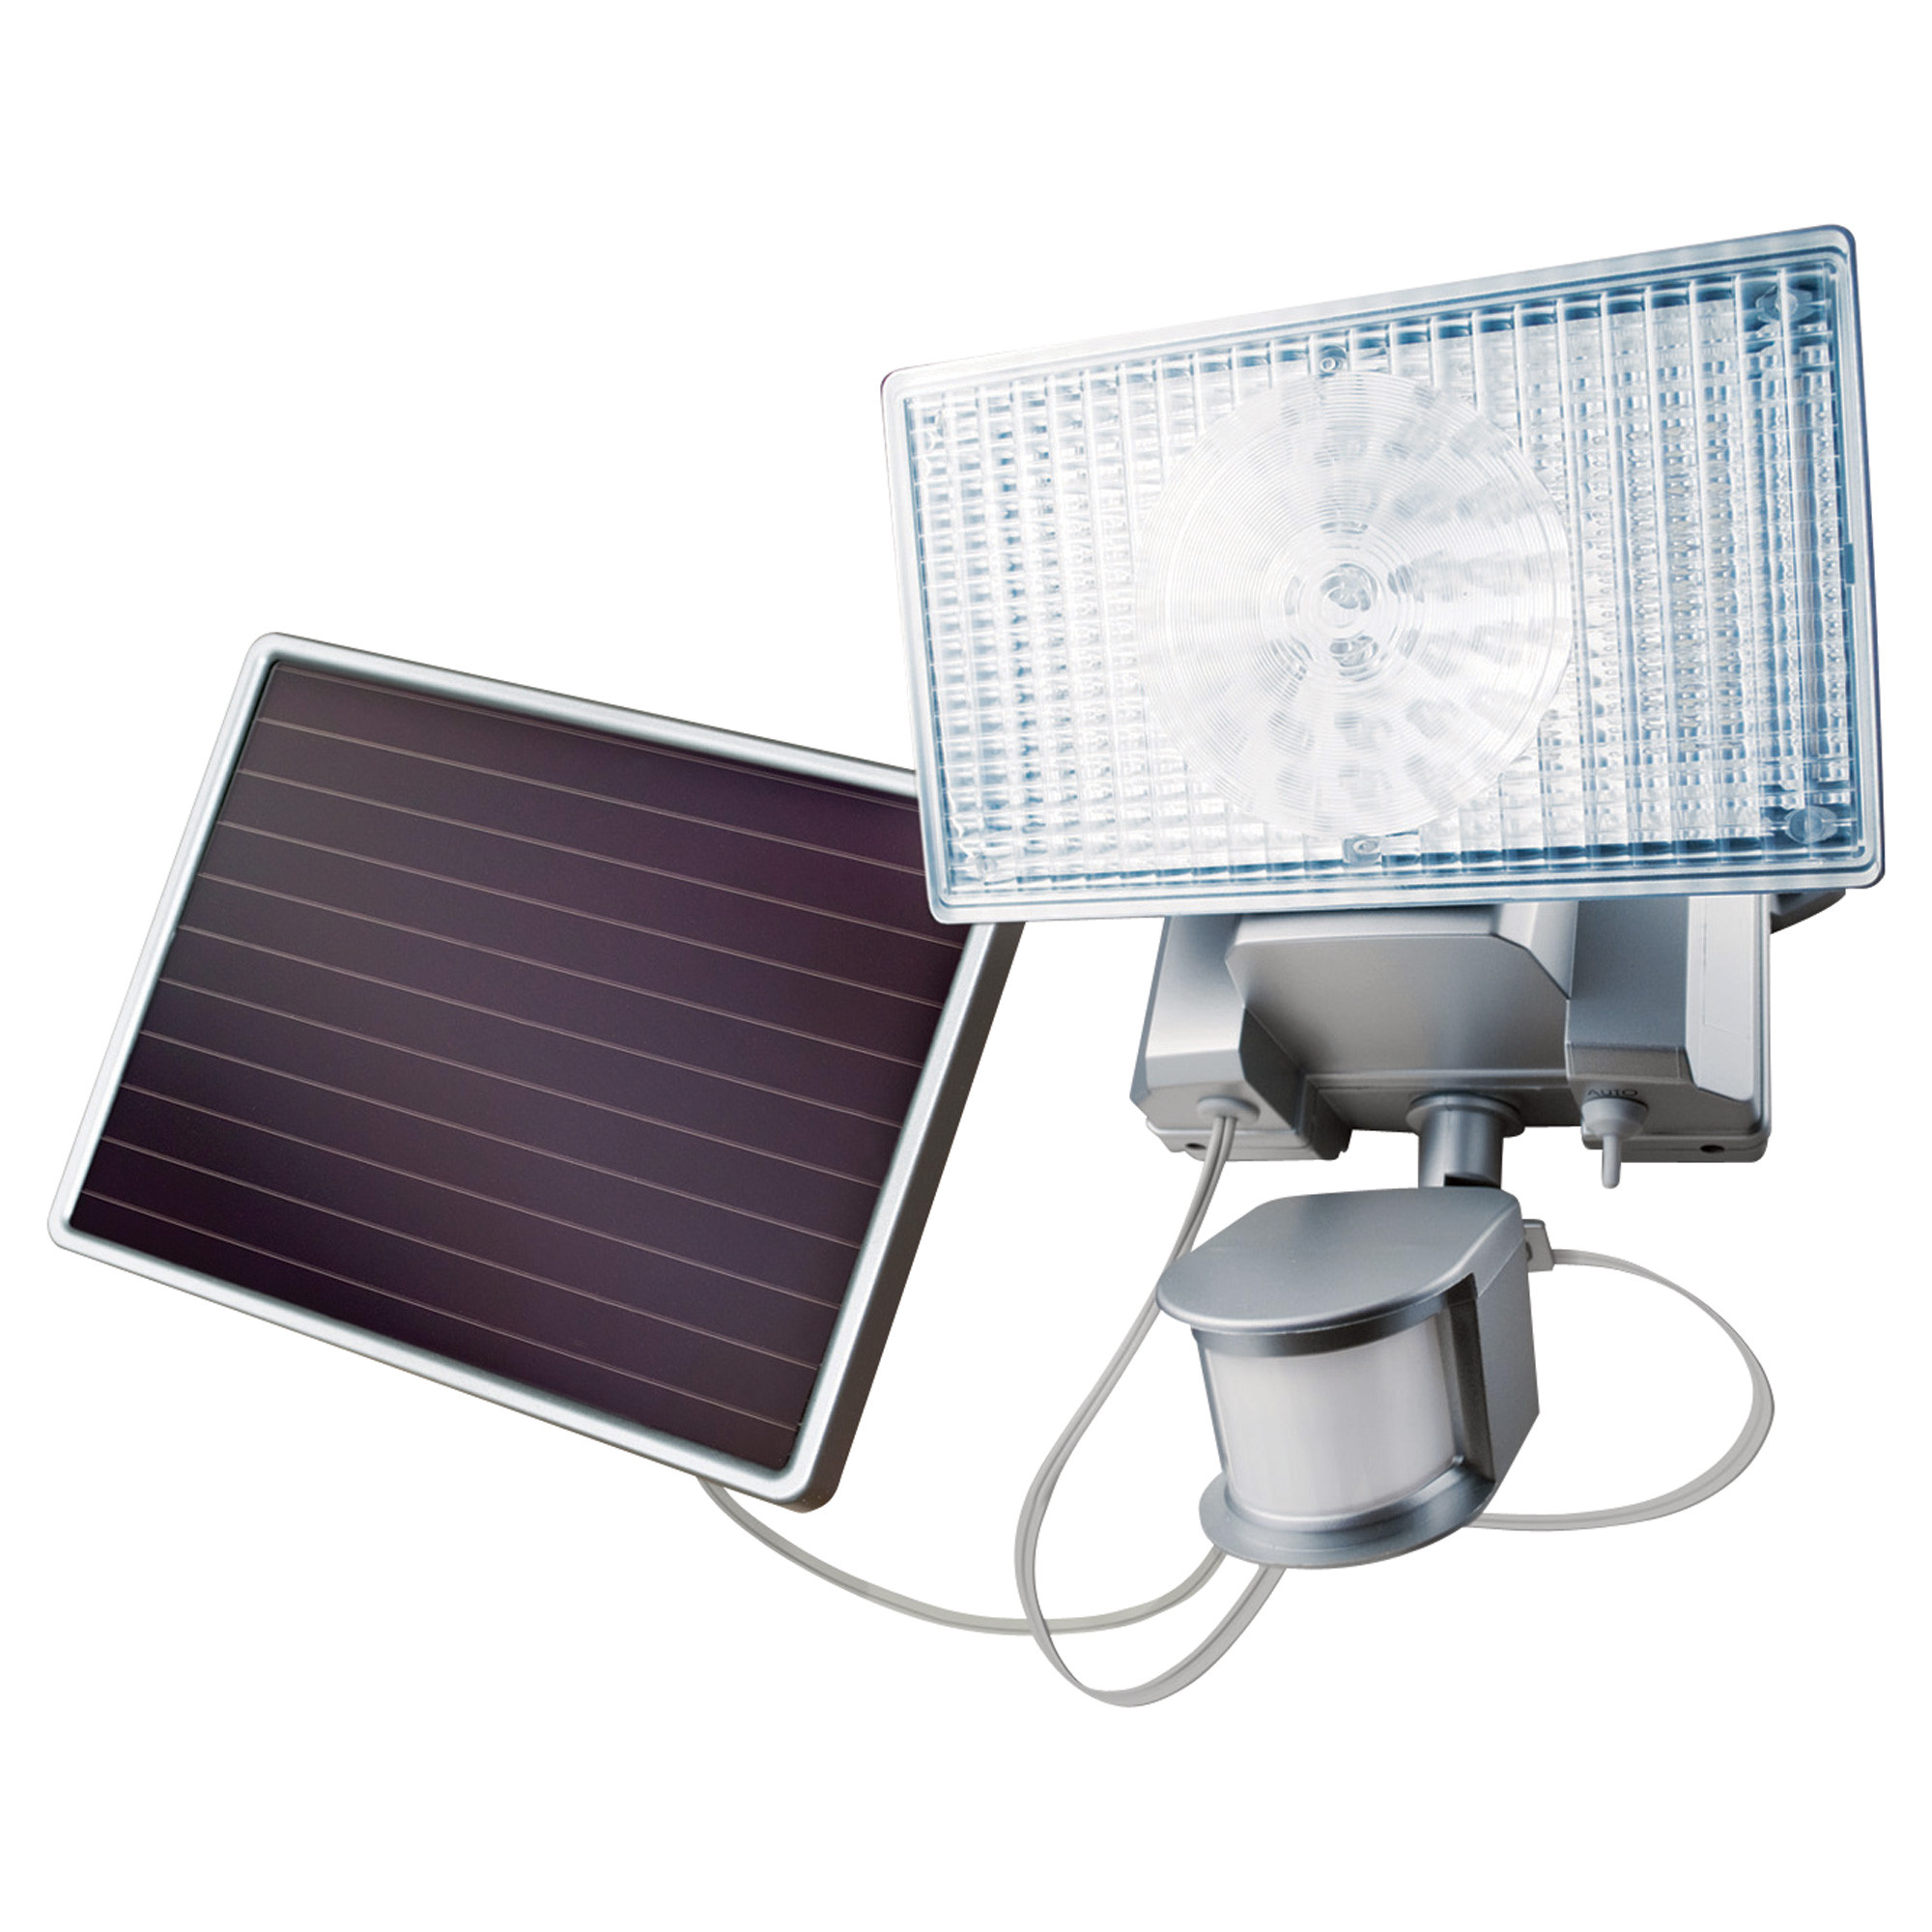 Solar Led Landscape Lights
 10 things to consider before choosing Led outdoor solar